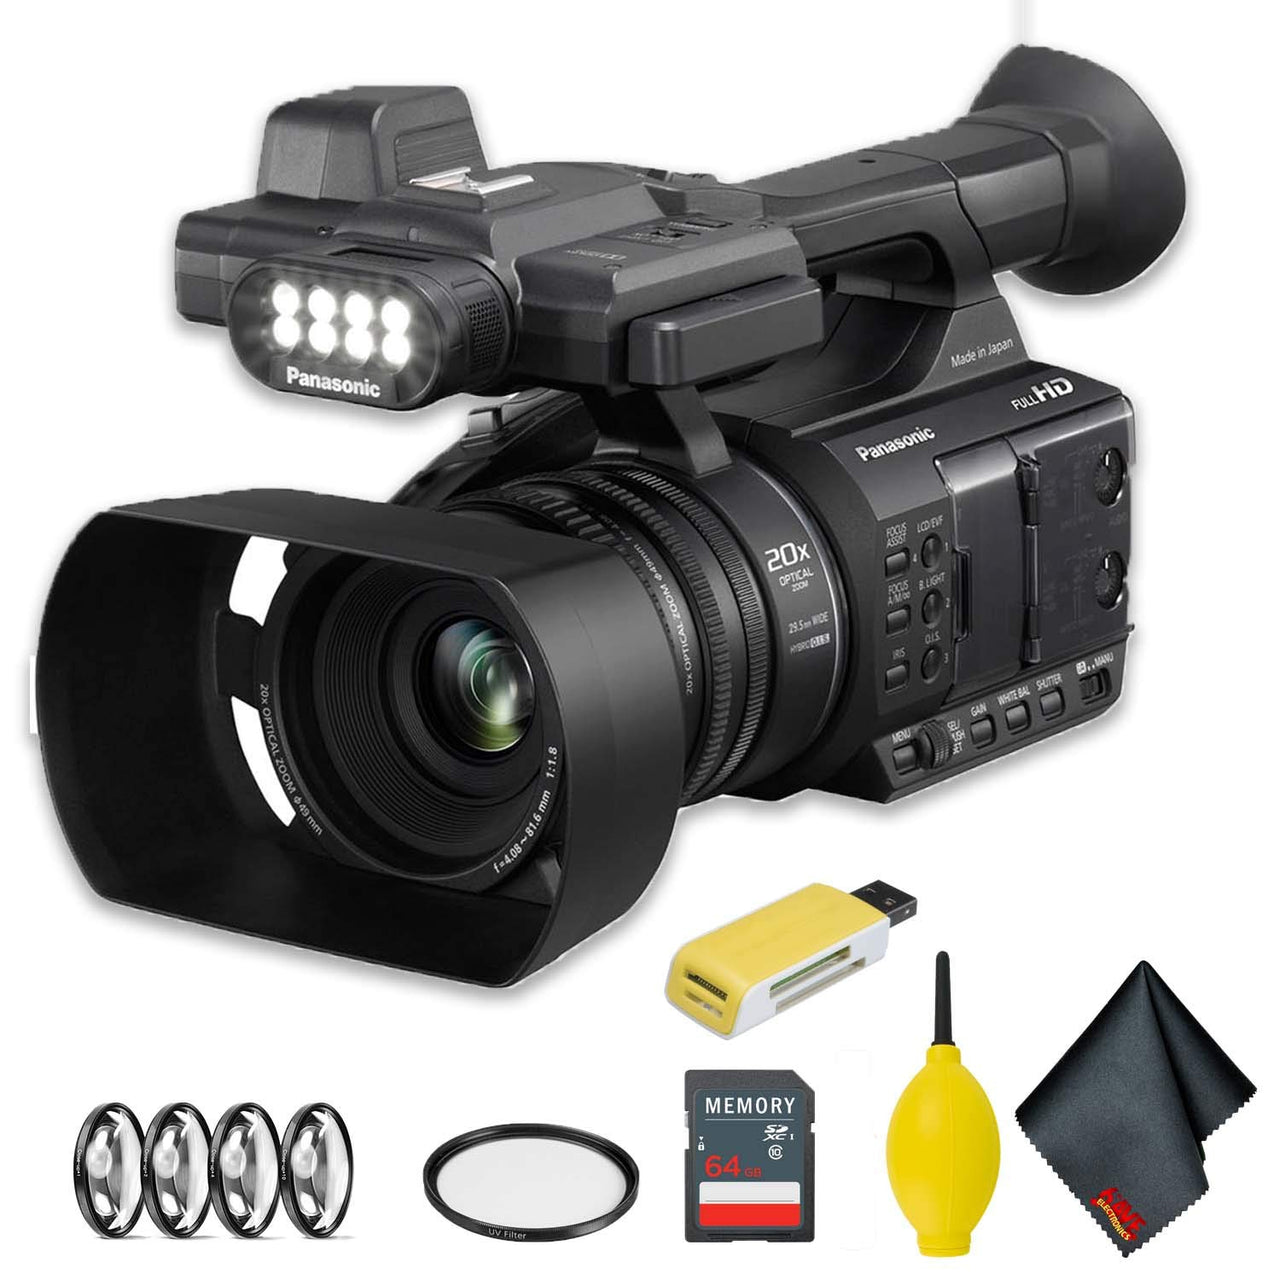 Panasonic AG-AC30 Full HD Camcorder with Touch Panel LCD Viewscreen and Built-in LED Light Standard Accessory Bundle w/U